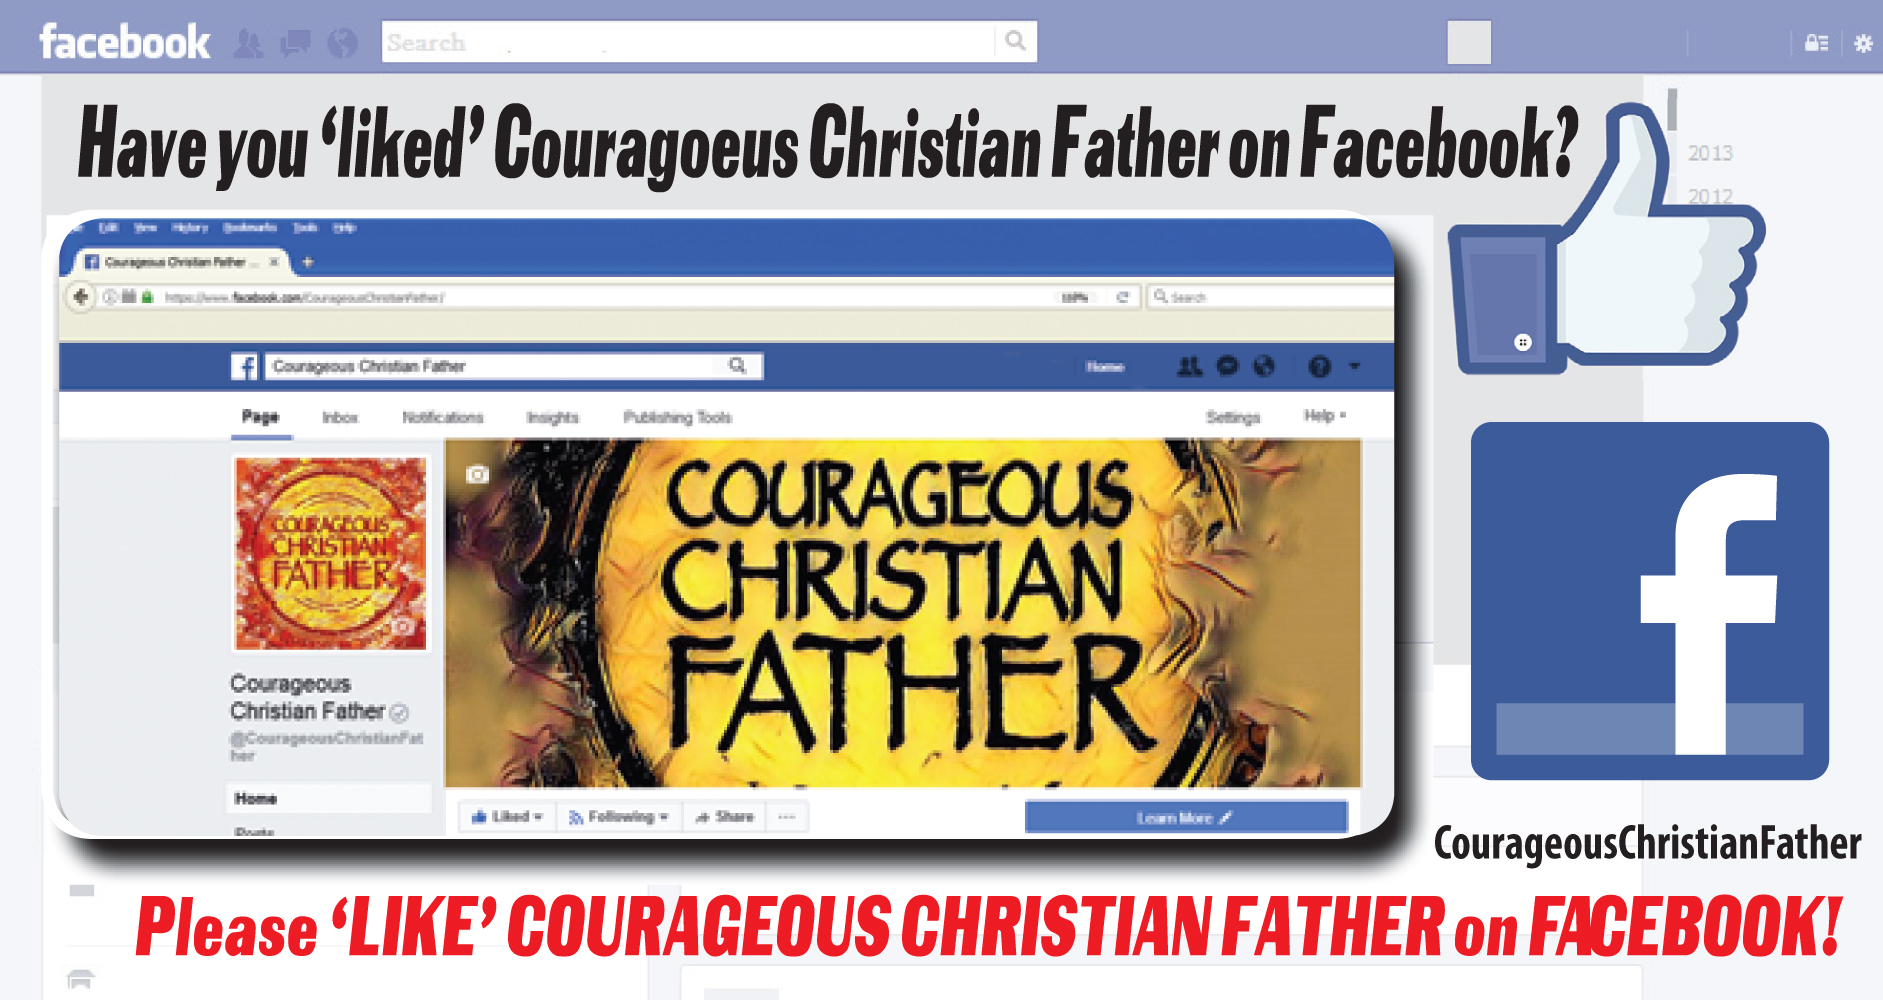 Have you ‘liked’ Courageous Christian Father on Facebook?